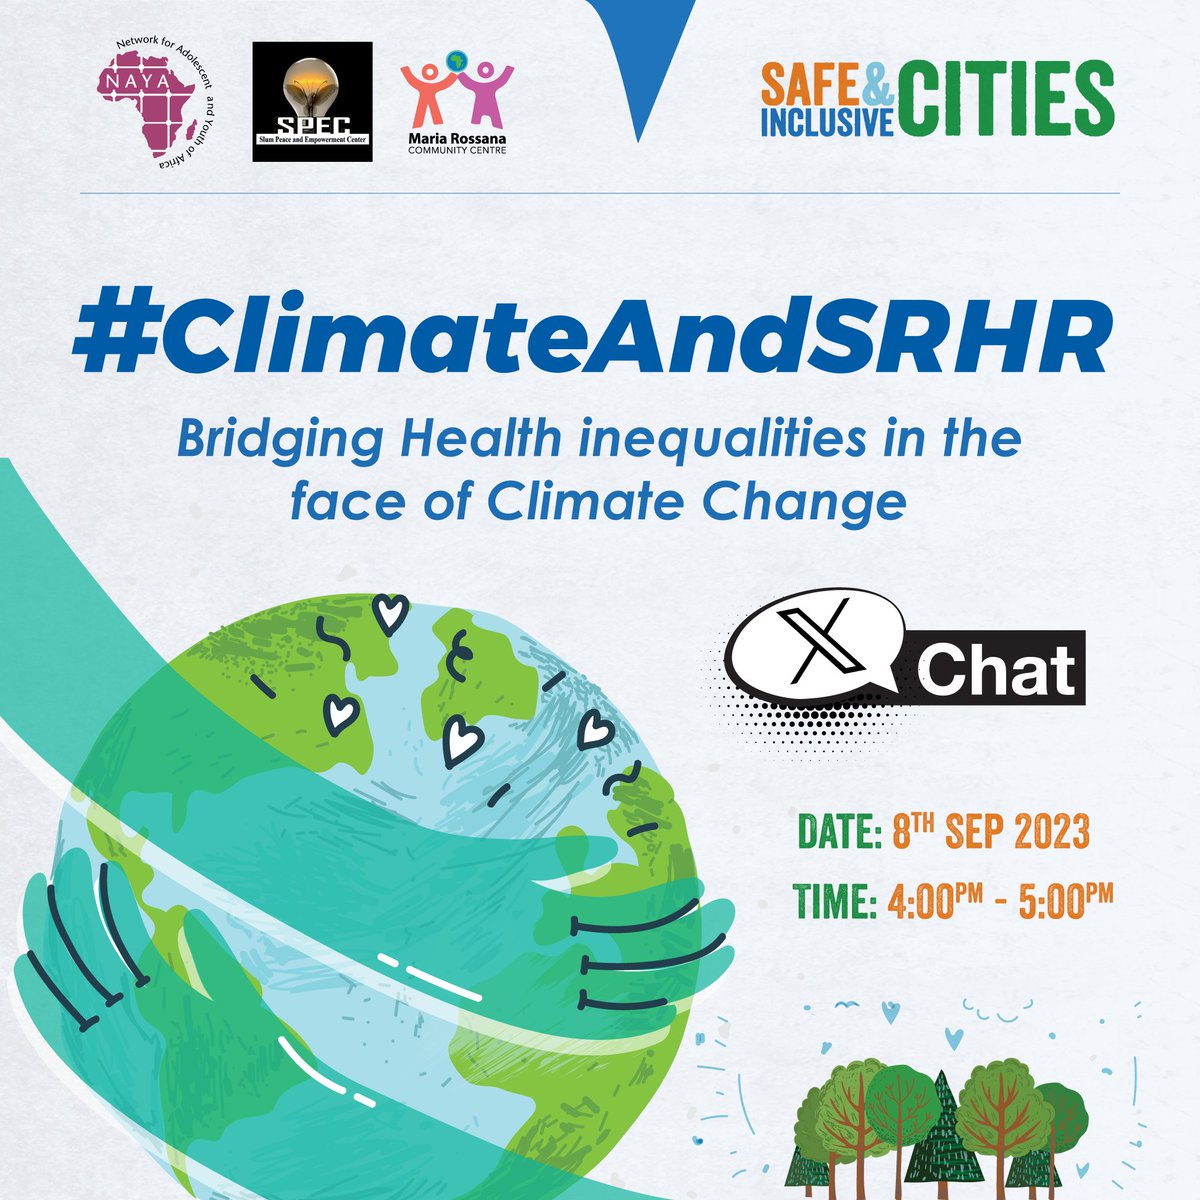 Let's explore how empowering local communities and strengthening their healthcare infrastructure can make a difference in climate adaptation and health equity. 
#ClimateAndHealth
#NAYAVoices